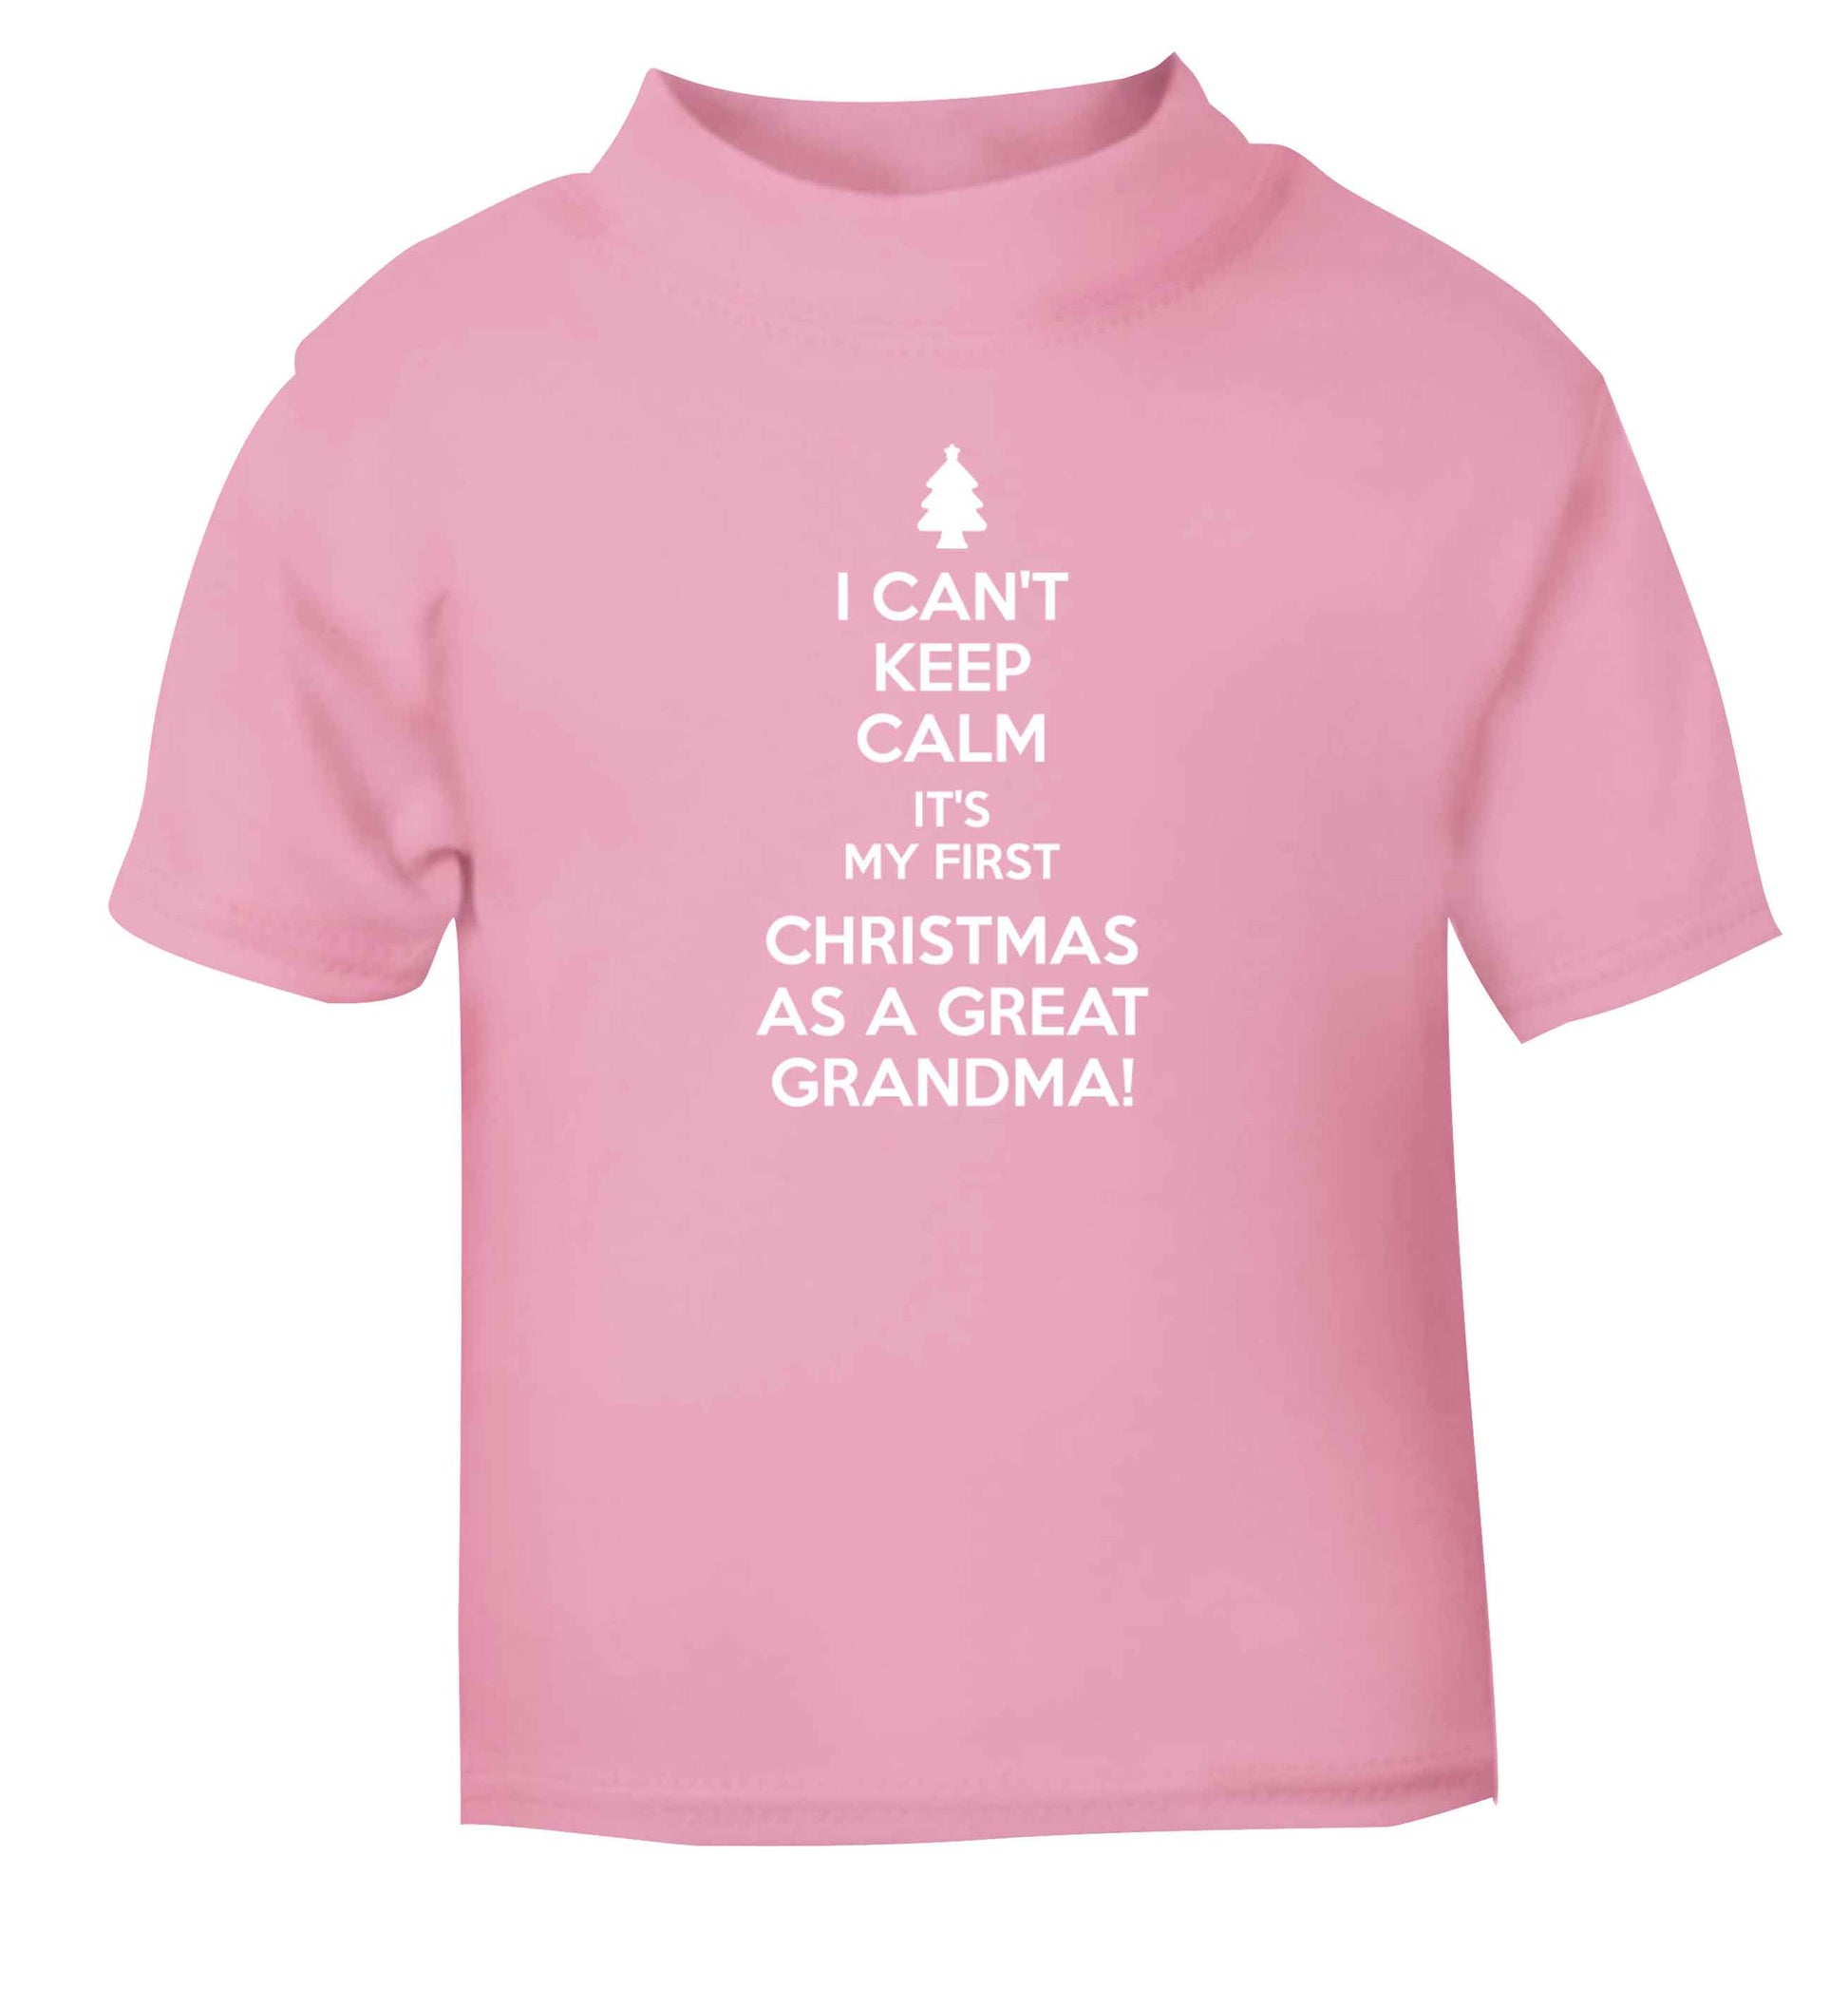 I can't keep calm it's my first Christmas as a great grandma! light pink Baby Toddler Tshirt 2 Years